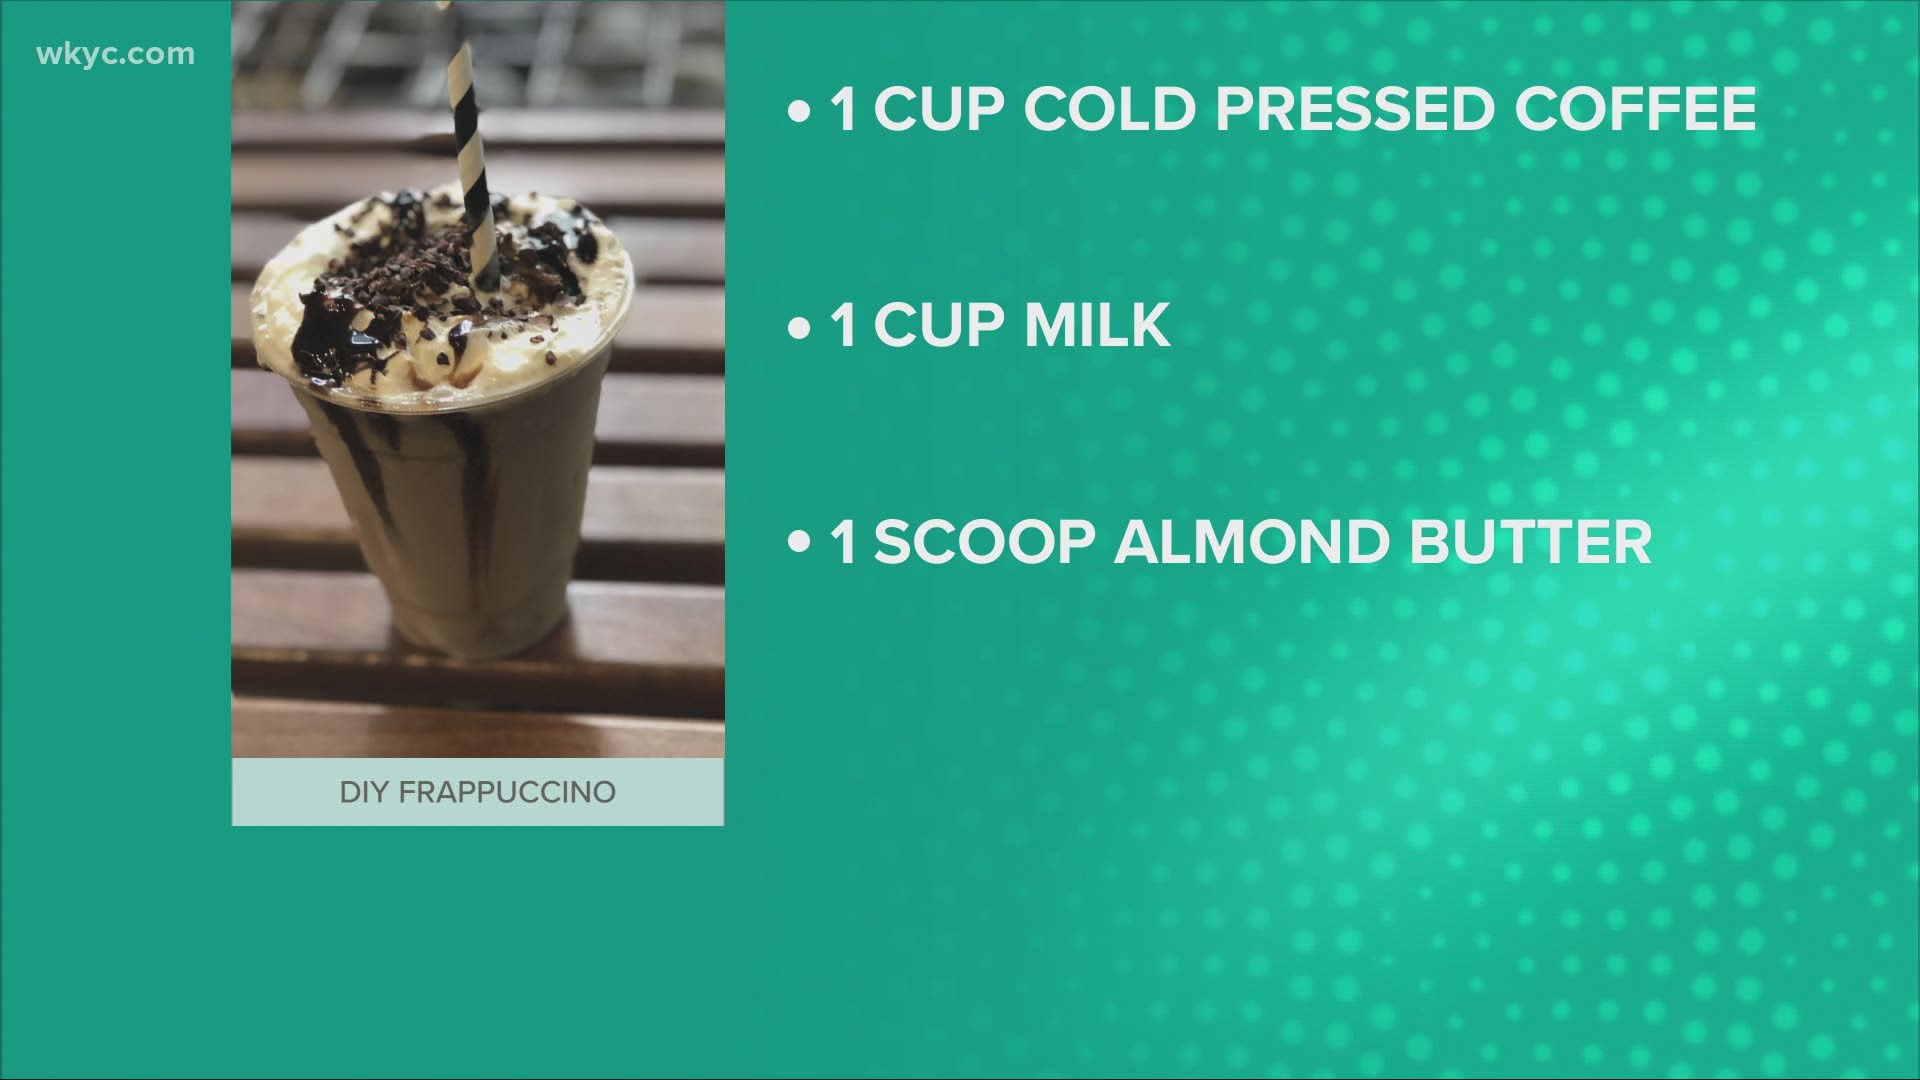 Don't spend money on going out for coffee.  Chef Anna teaches us how to make an easy frappuccino from home.